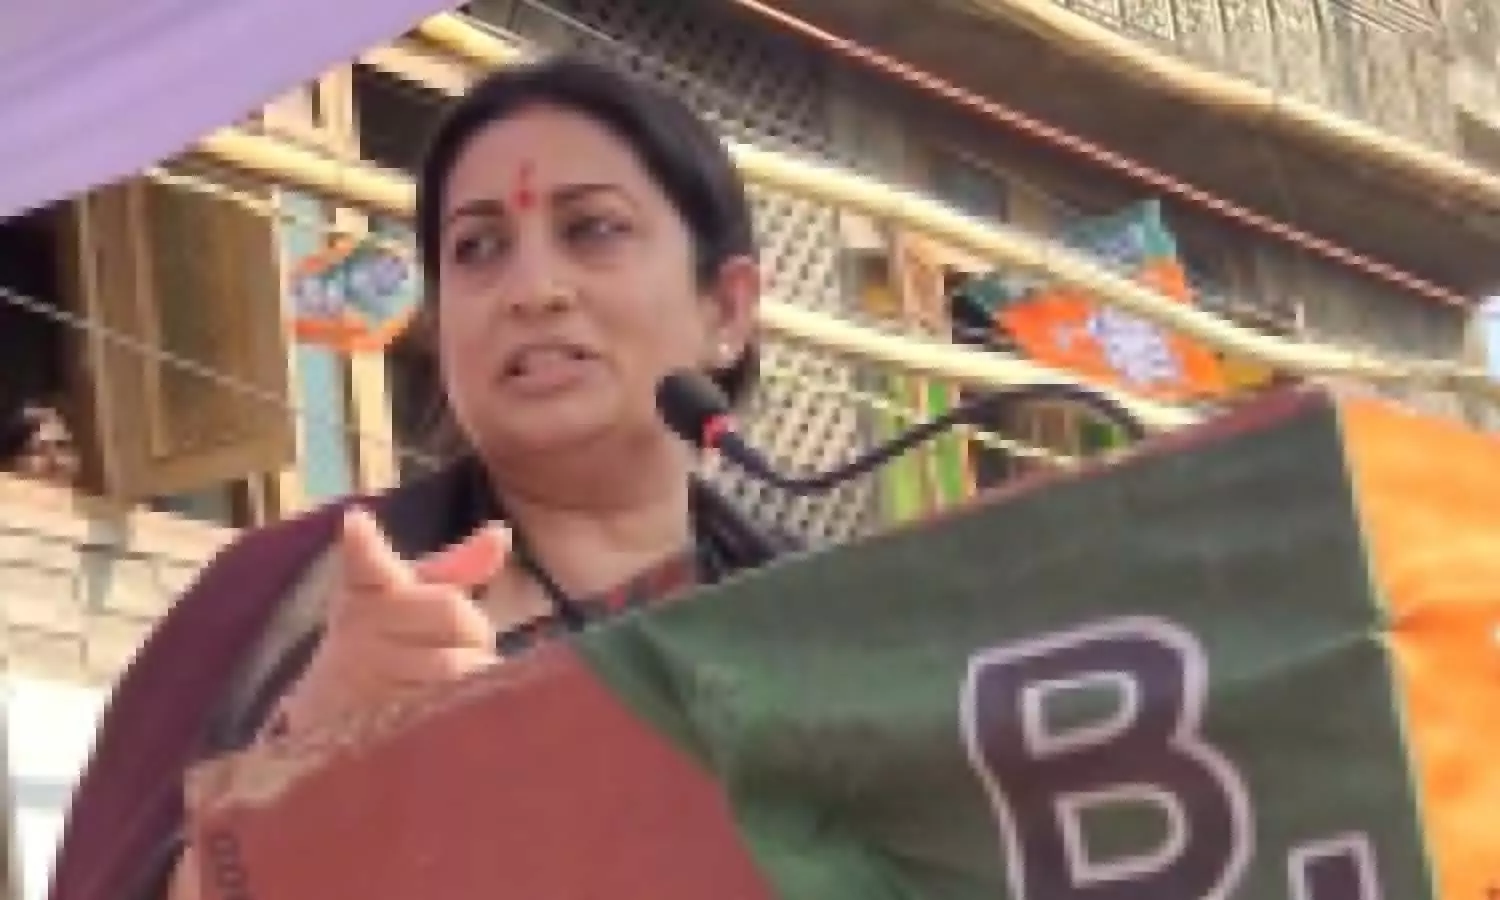 UP Election 2022: Smriti Irani lashed out at the opposition in Prayagraj, said- Lakshmi comes on lotus flower, not on cycle